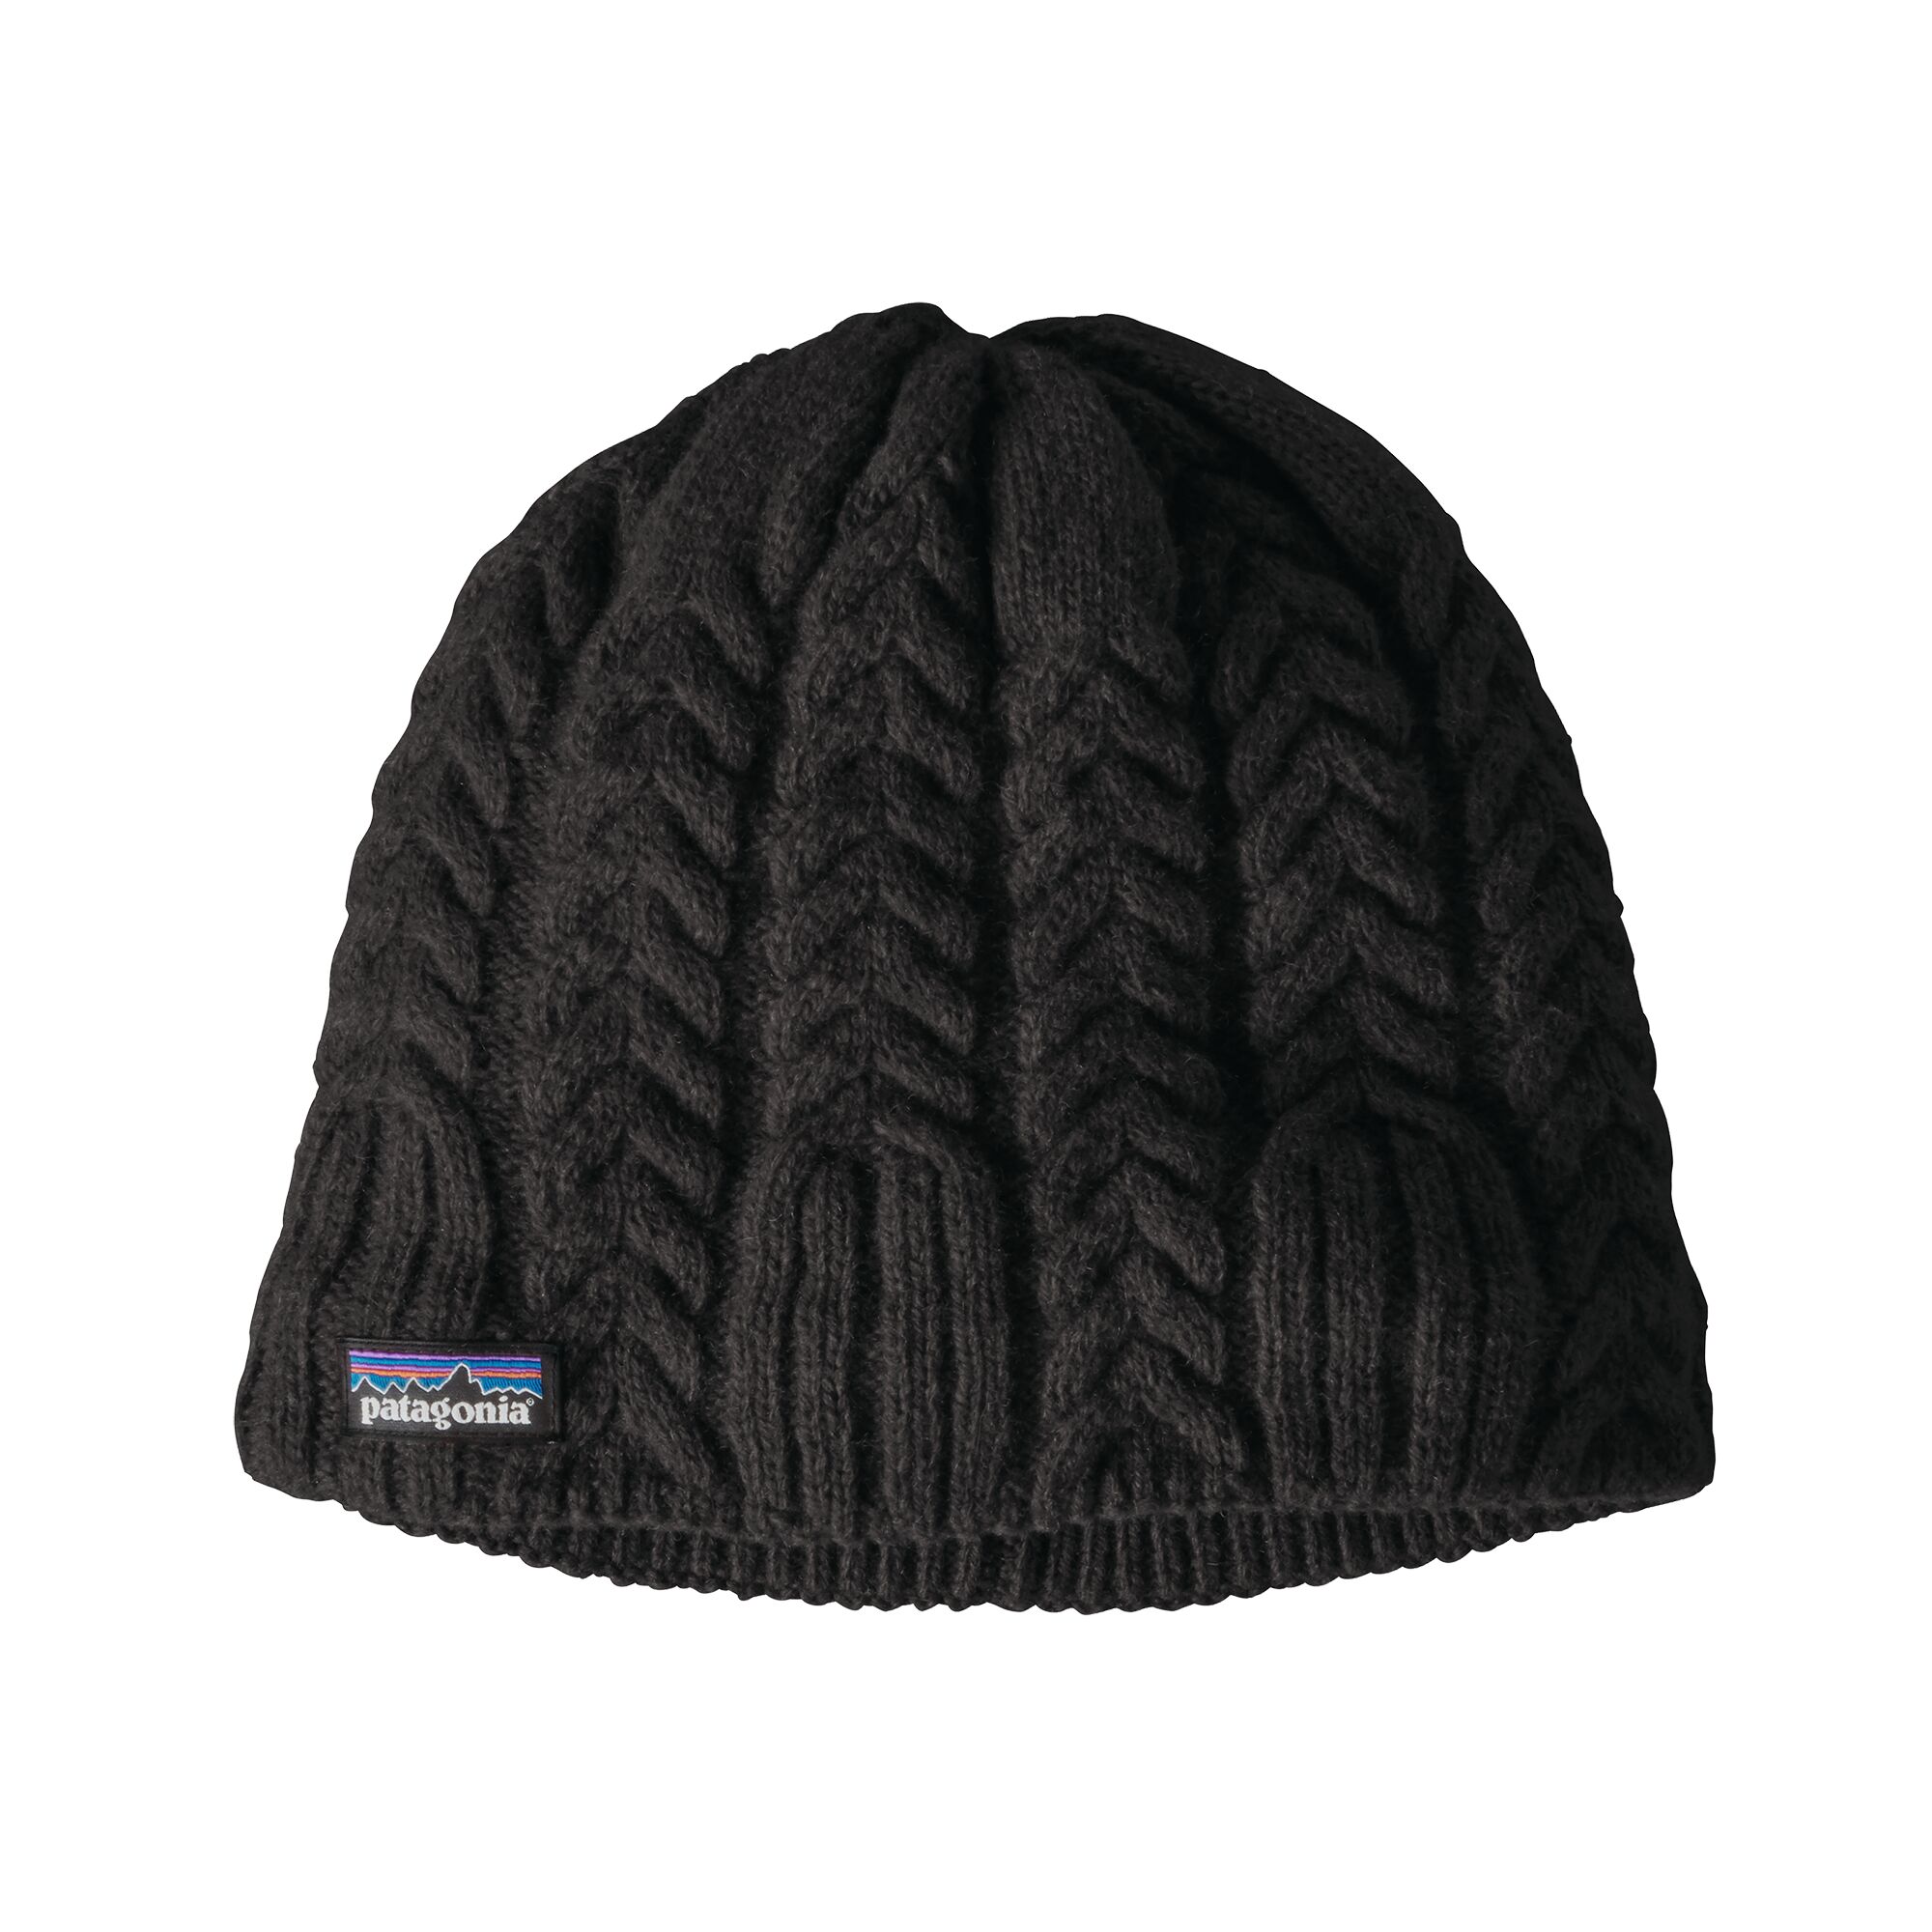 Patagonia Cable Beanie Black